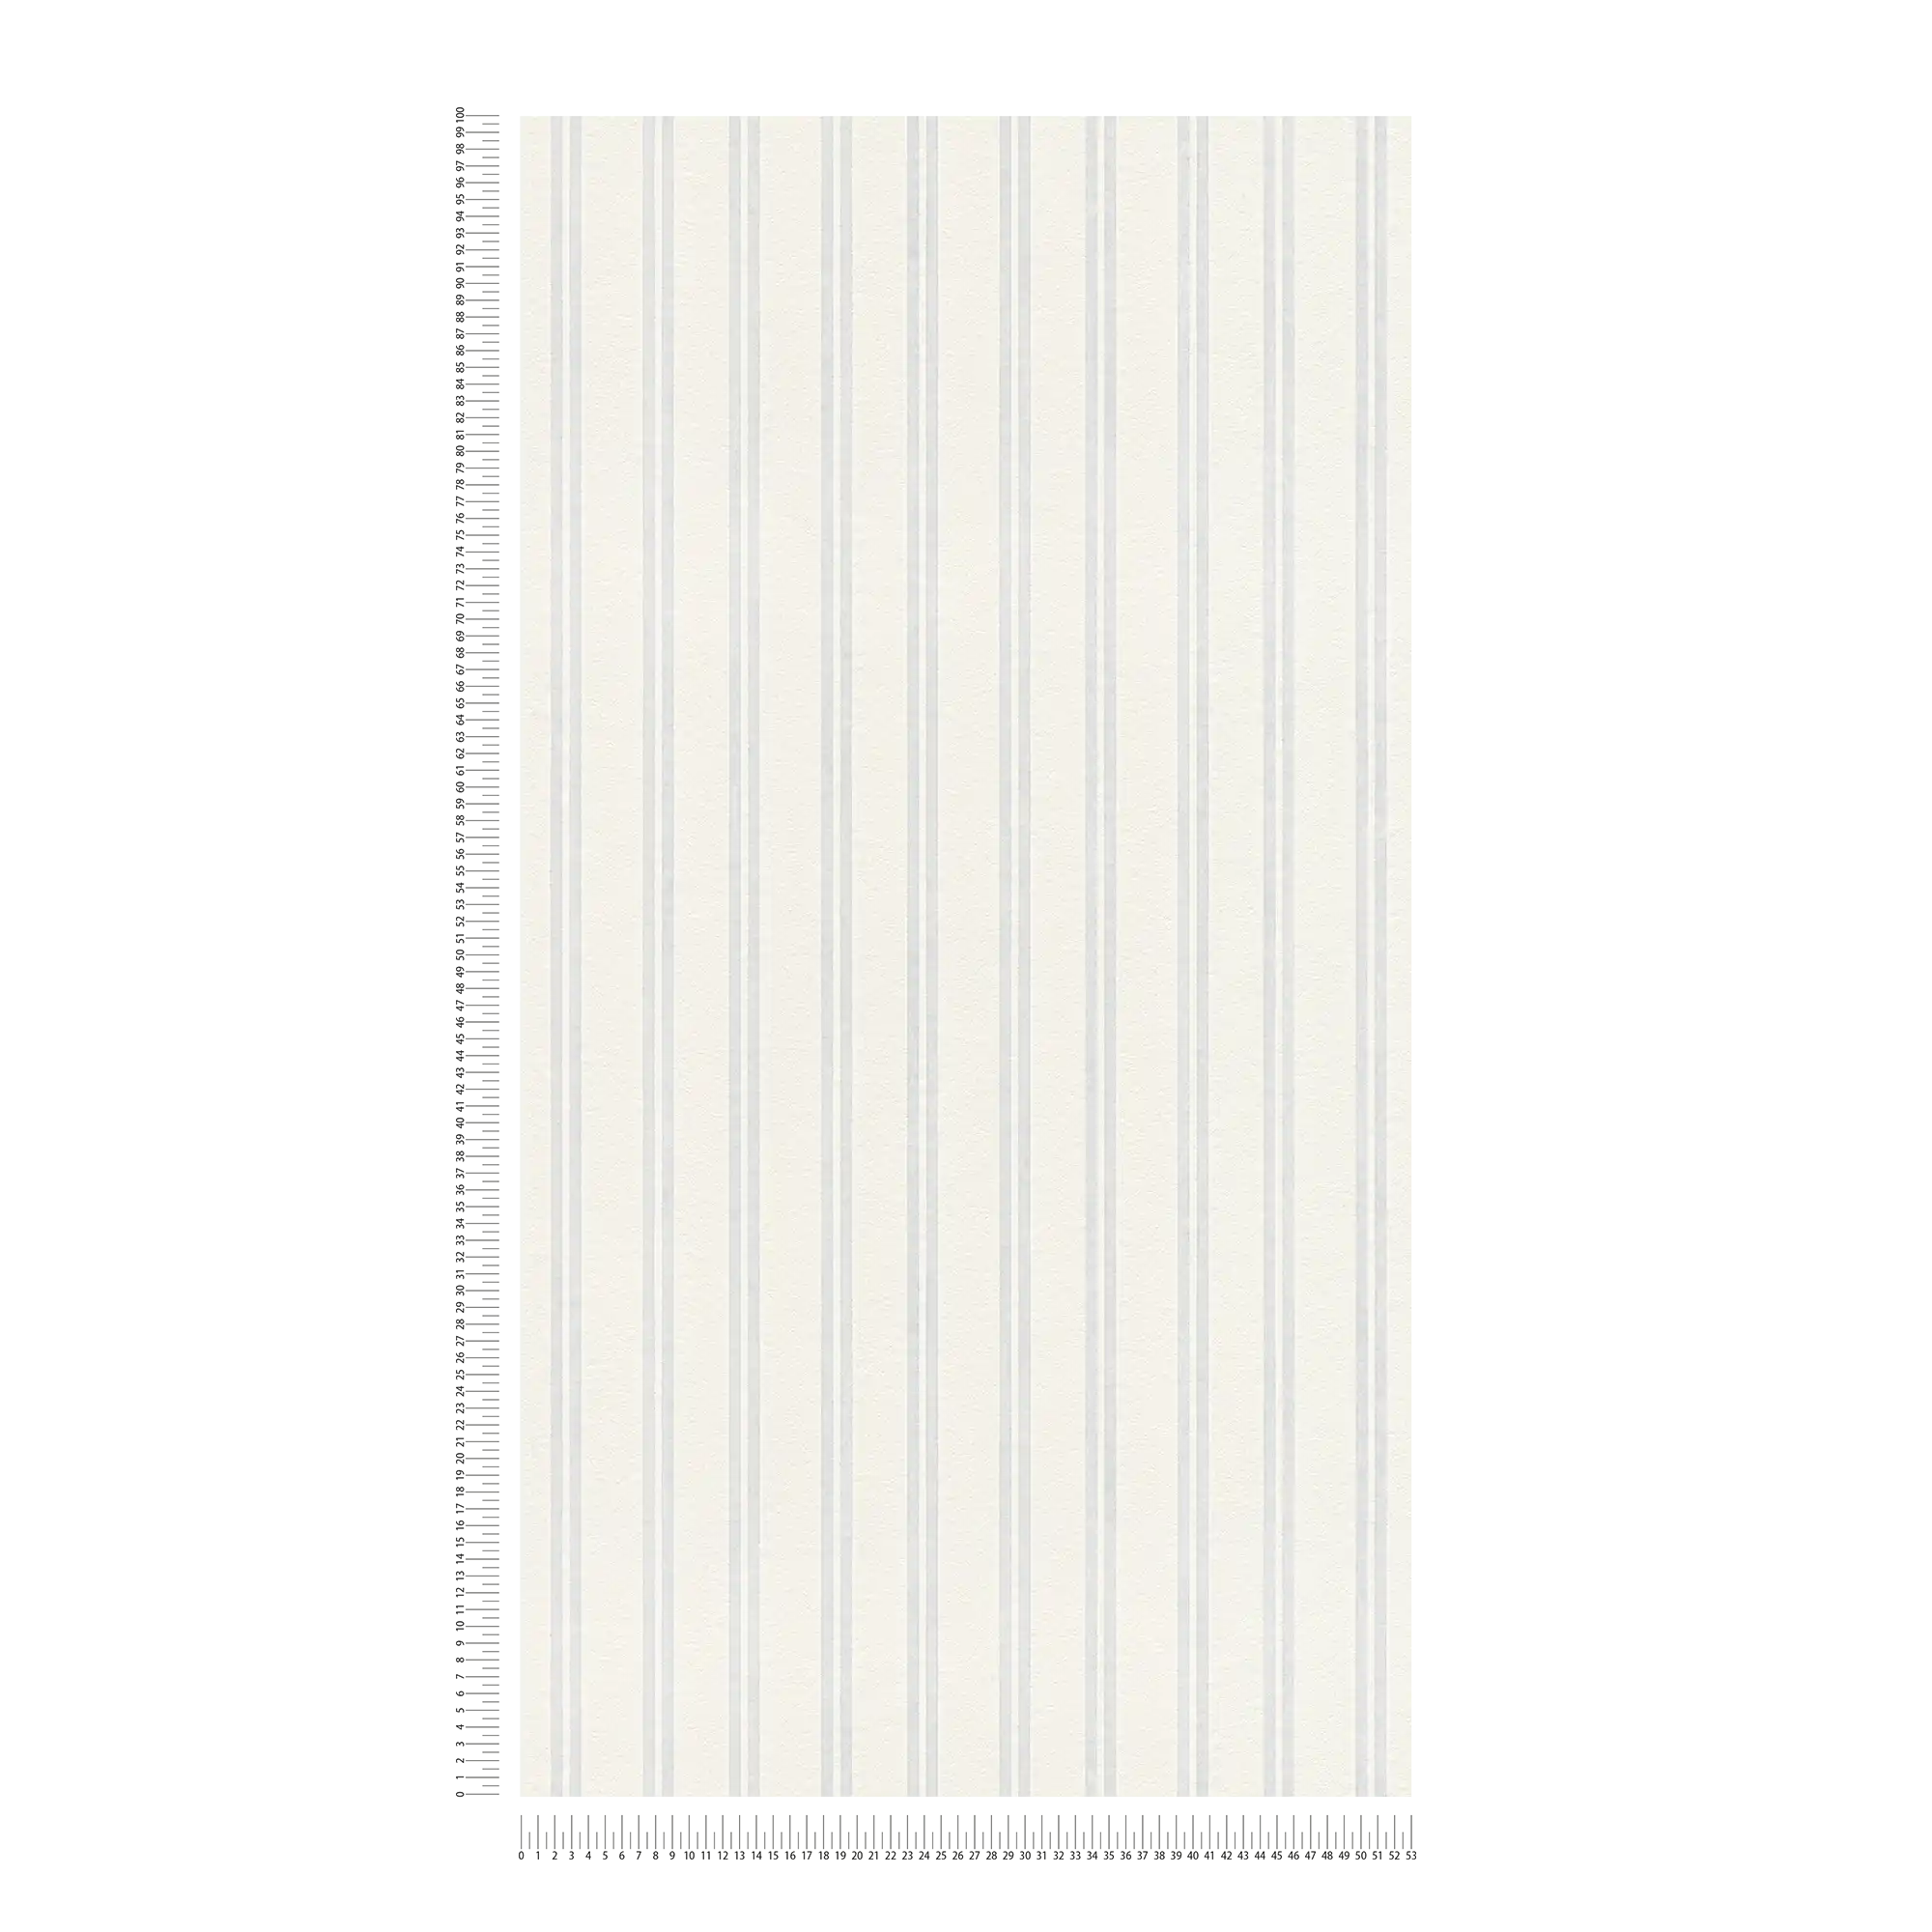             Wallpaper narrow stripe pattern and 3D effect - Paintable, White
        